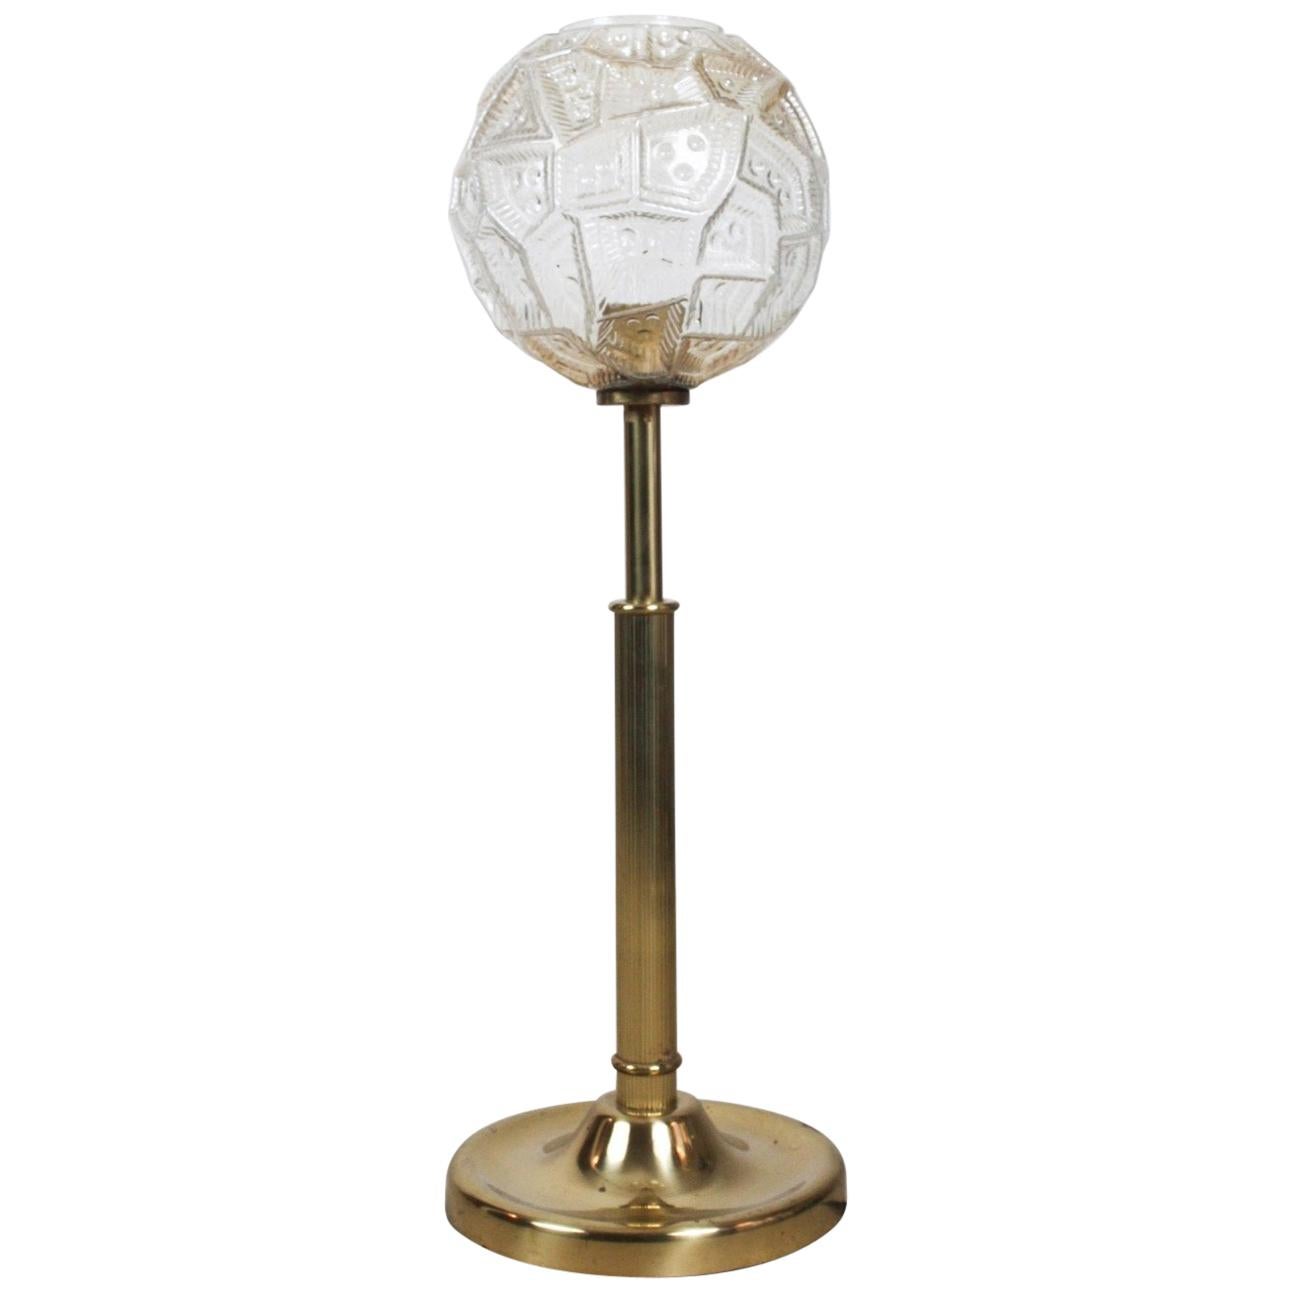 Adolf Loos Stlye Brass Floor Lamp with a Unique Glass Shade For Sale